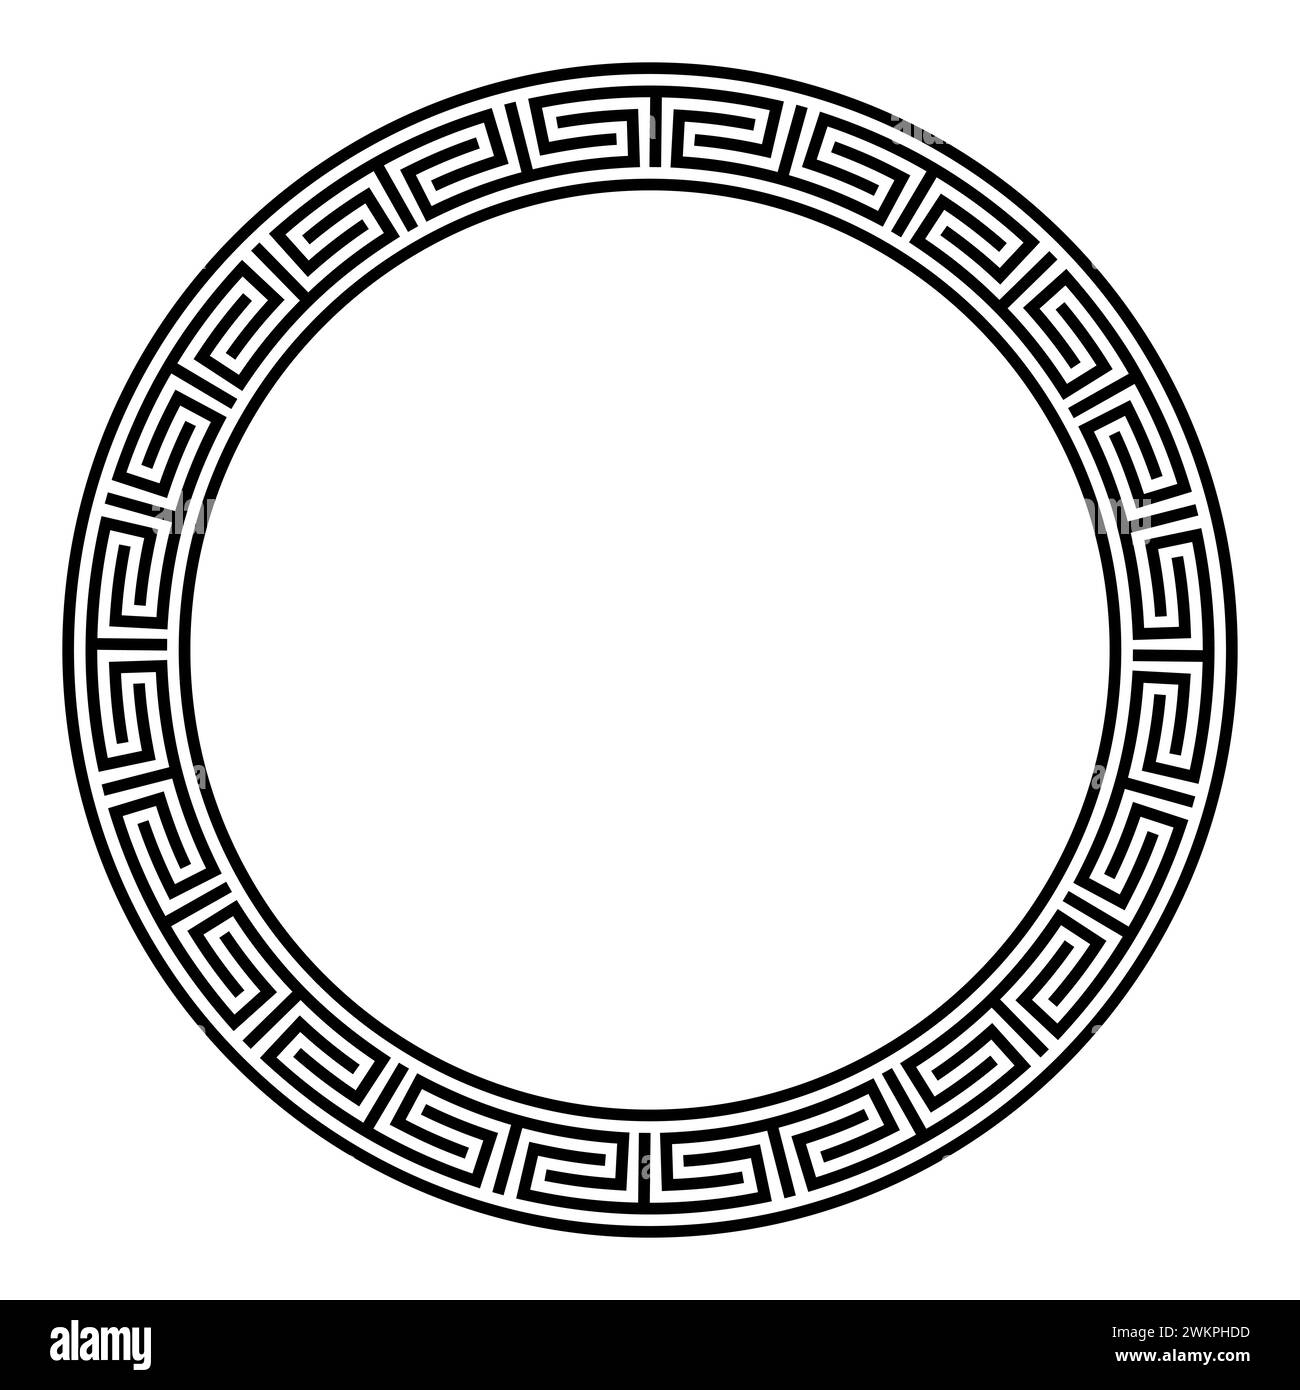 Chinese meander pattern, circle frame. Decorative round border with disconnected and direction changing meanderings, a repeated motif. Stock Photo